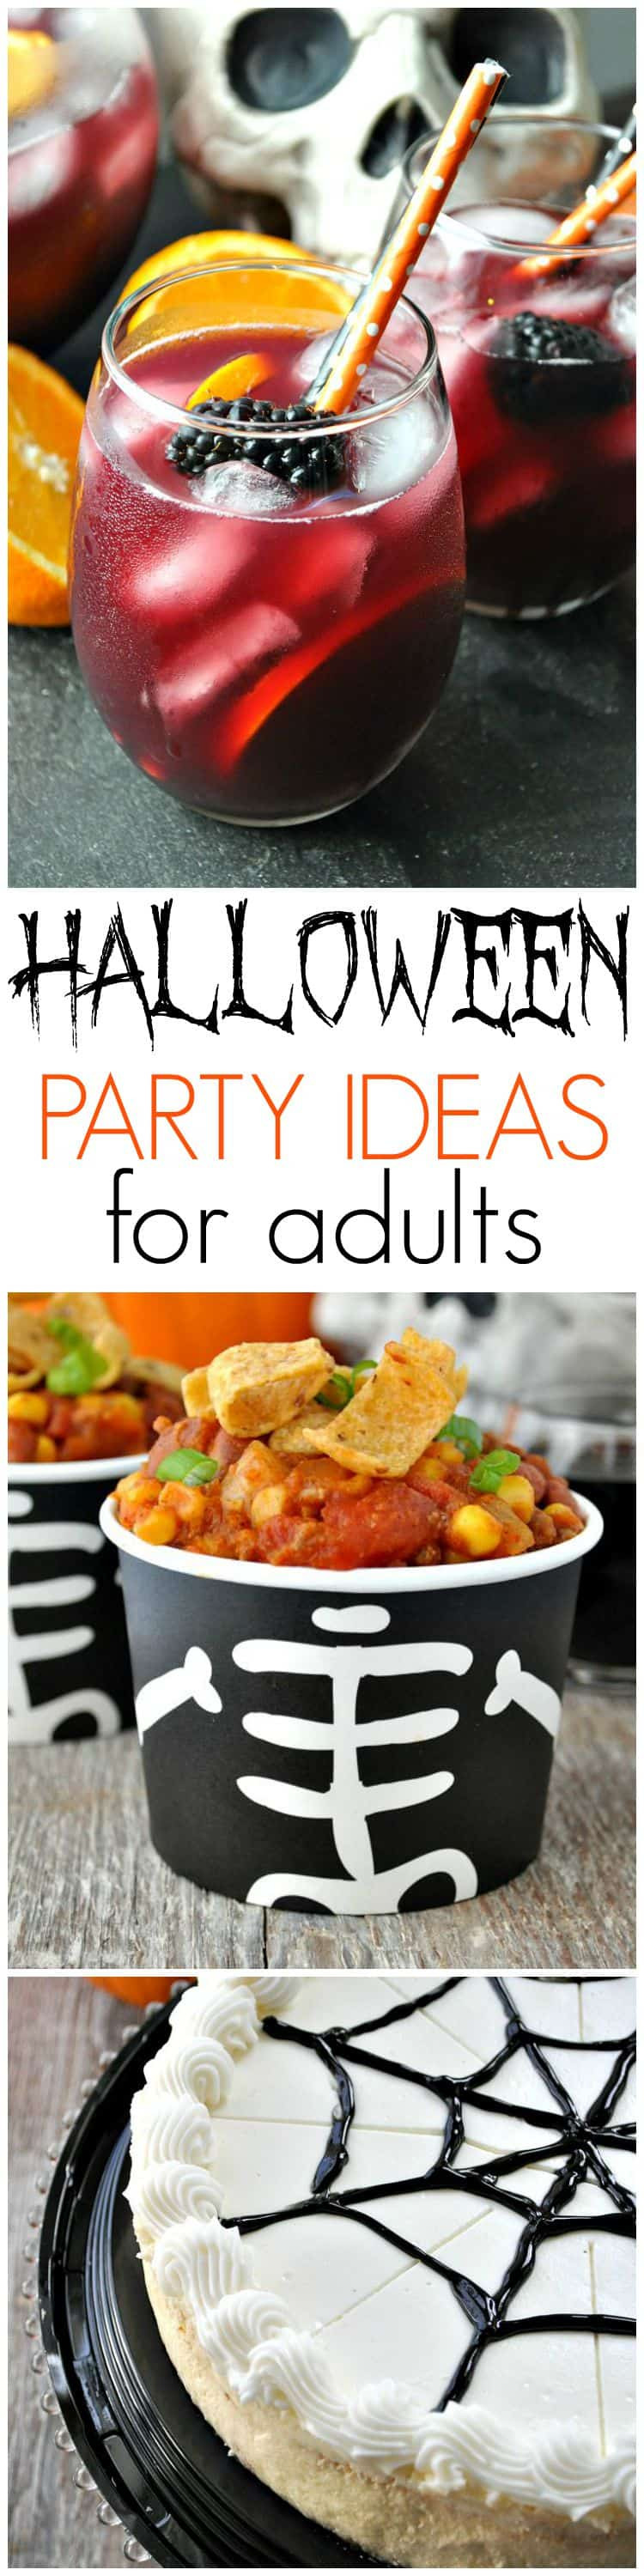 Halloween Adults Party Ideas
 Slow Cooker Pumpkin Chili Halloween Party Ideas for